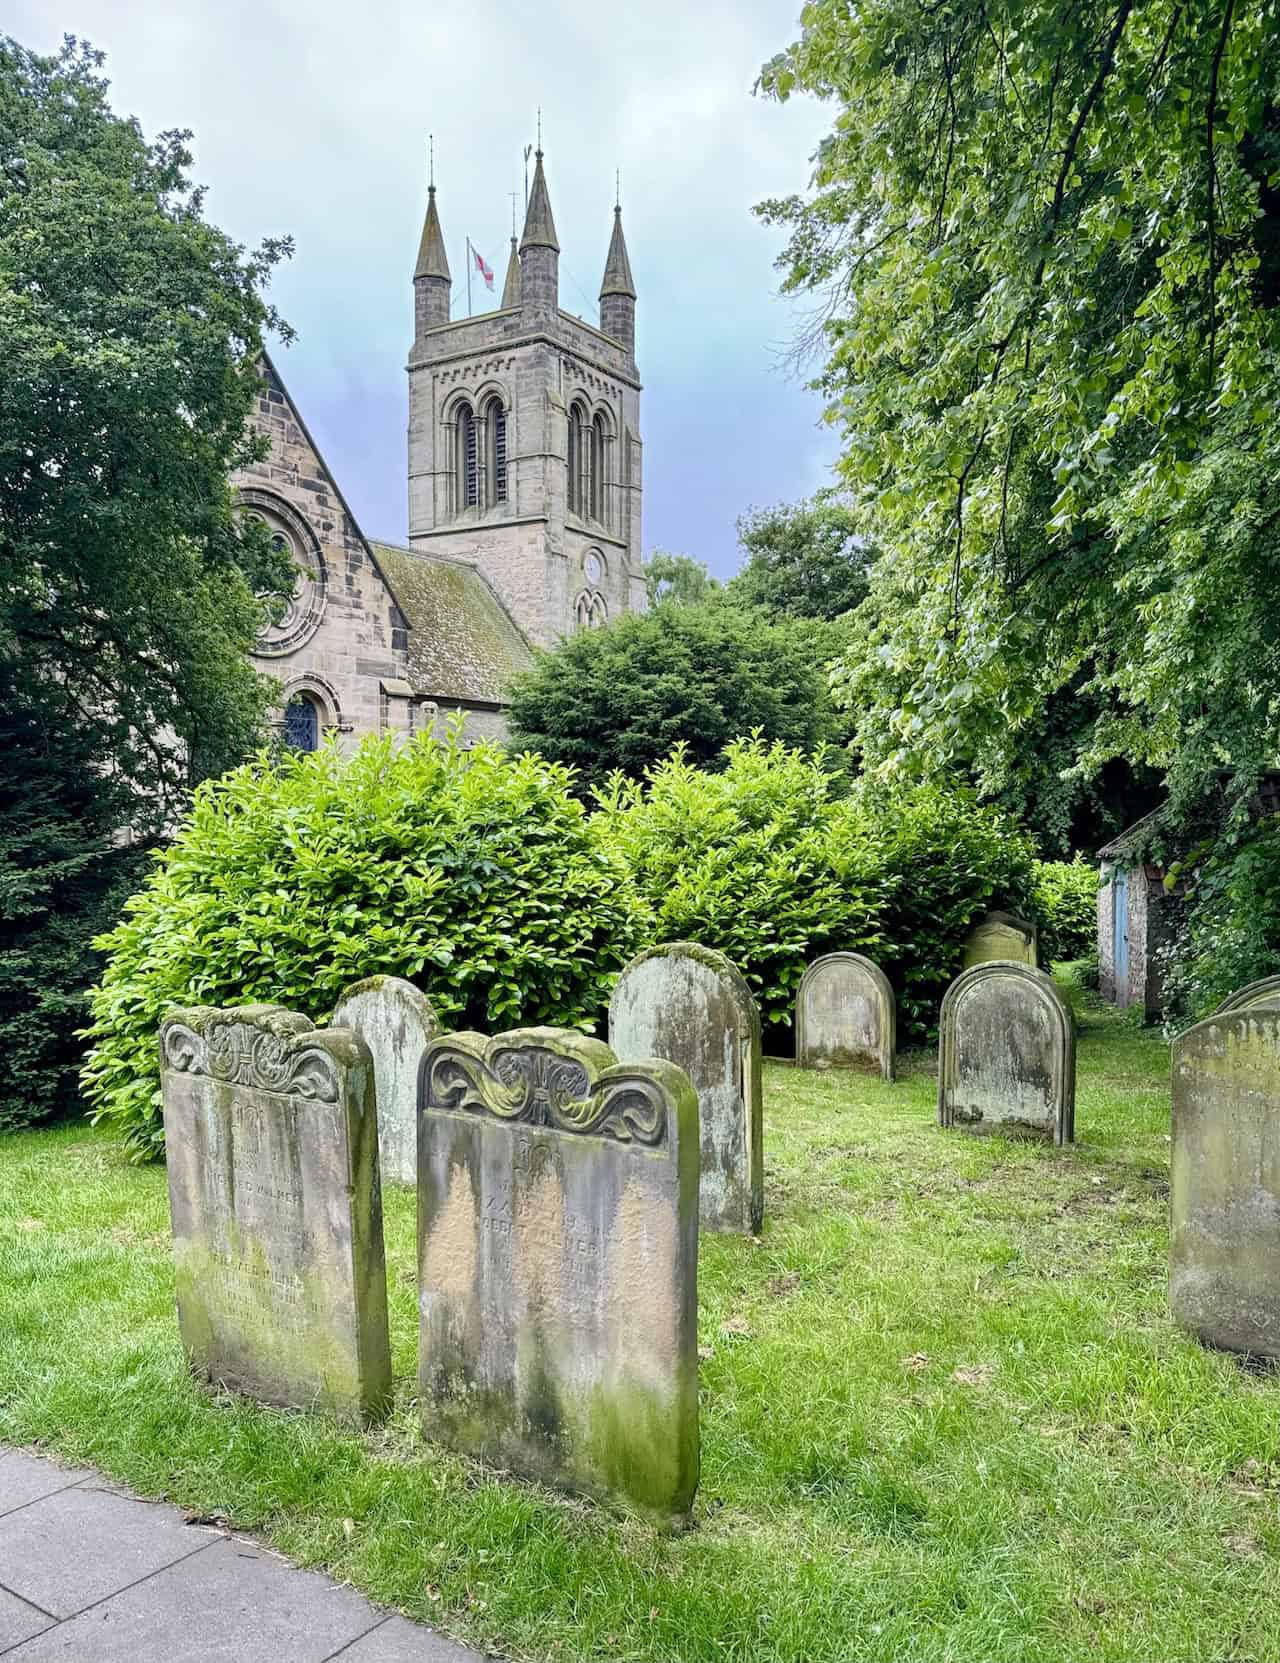 The Church of All Saints in Helmsley, North Yorkshire, is an Anglican parish church with origins predating the Norman Conquest.